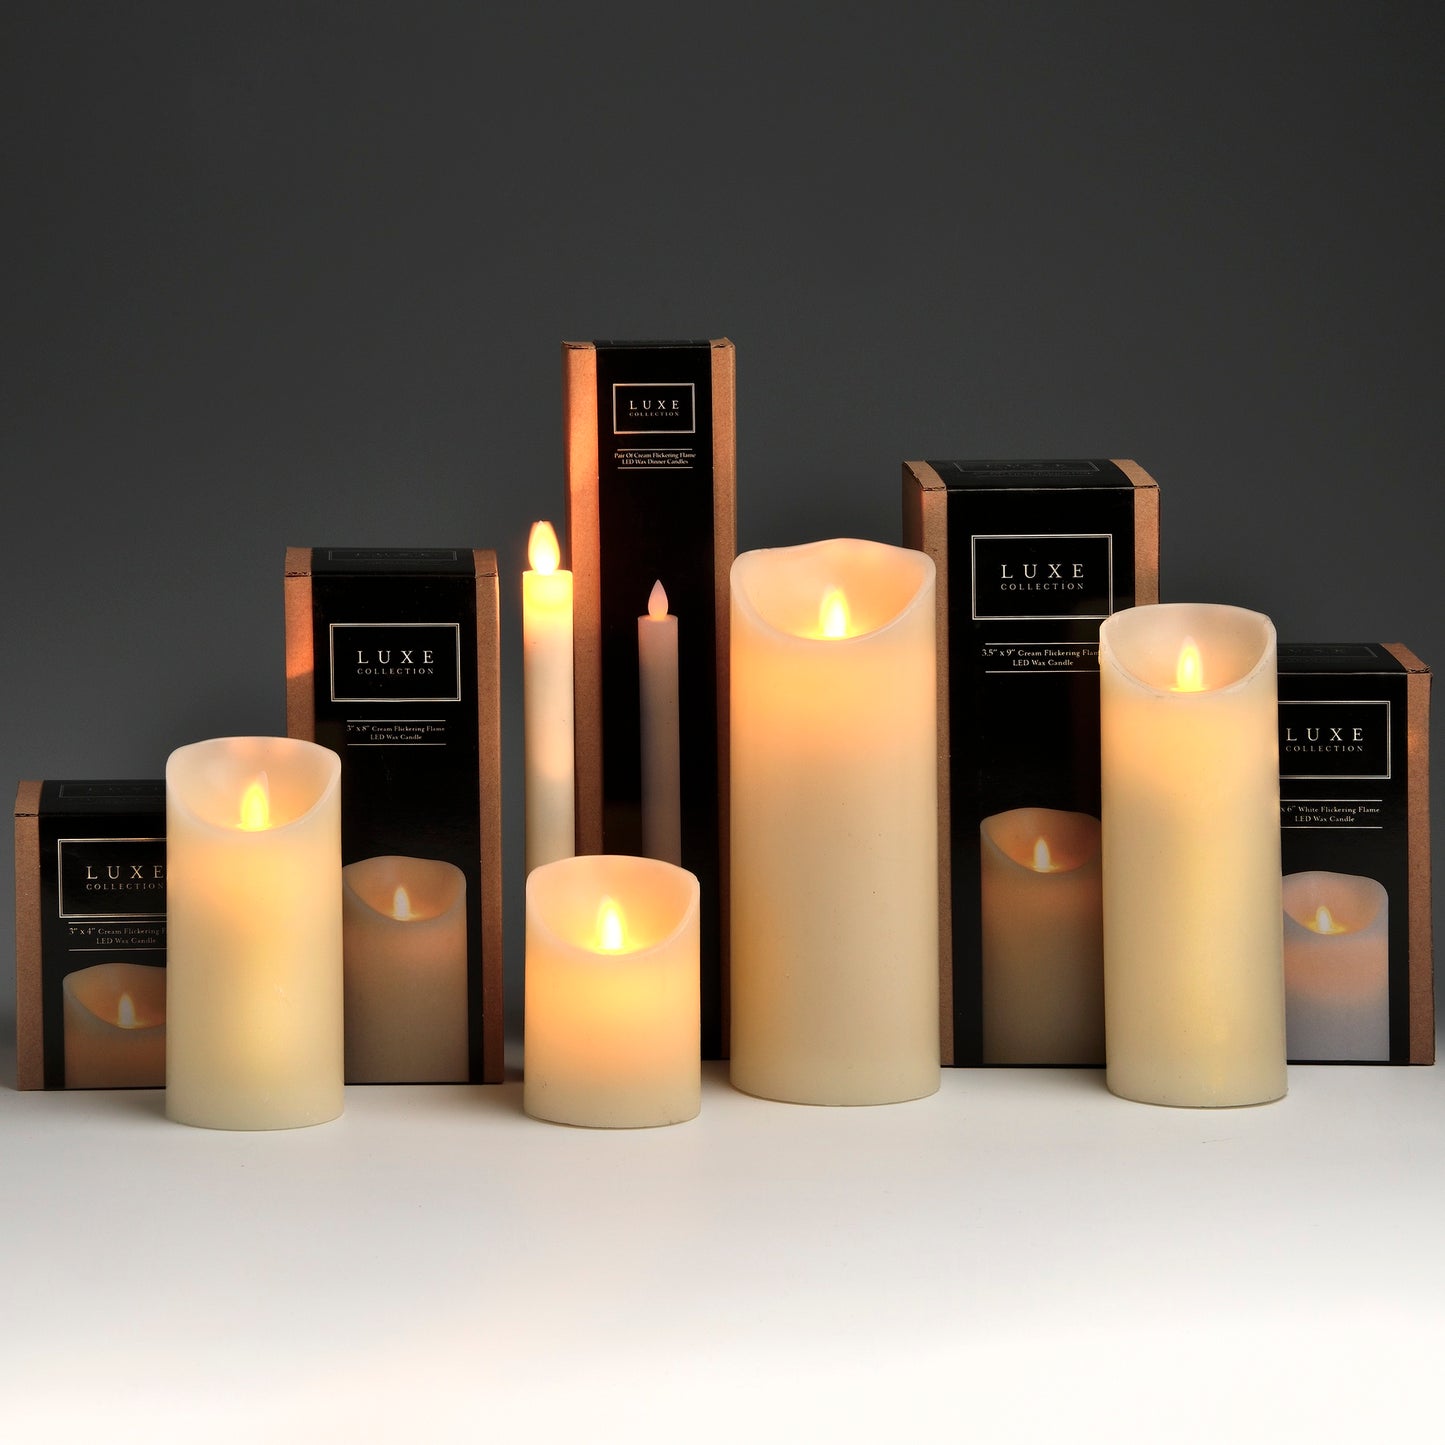 Pair Of Cream Luxe Flickering Flame LED Wax Dinner Candles